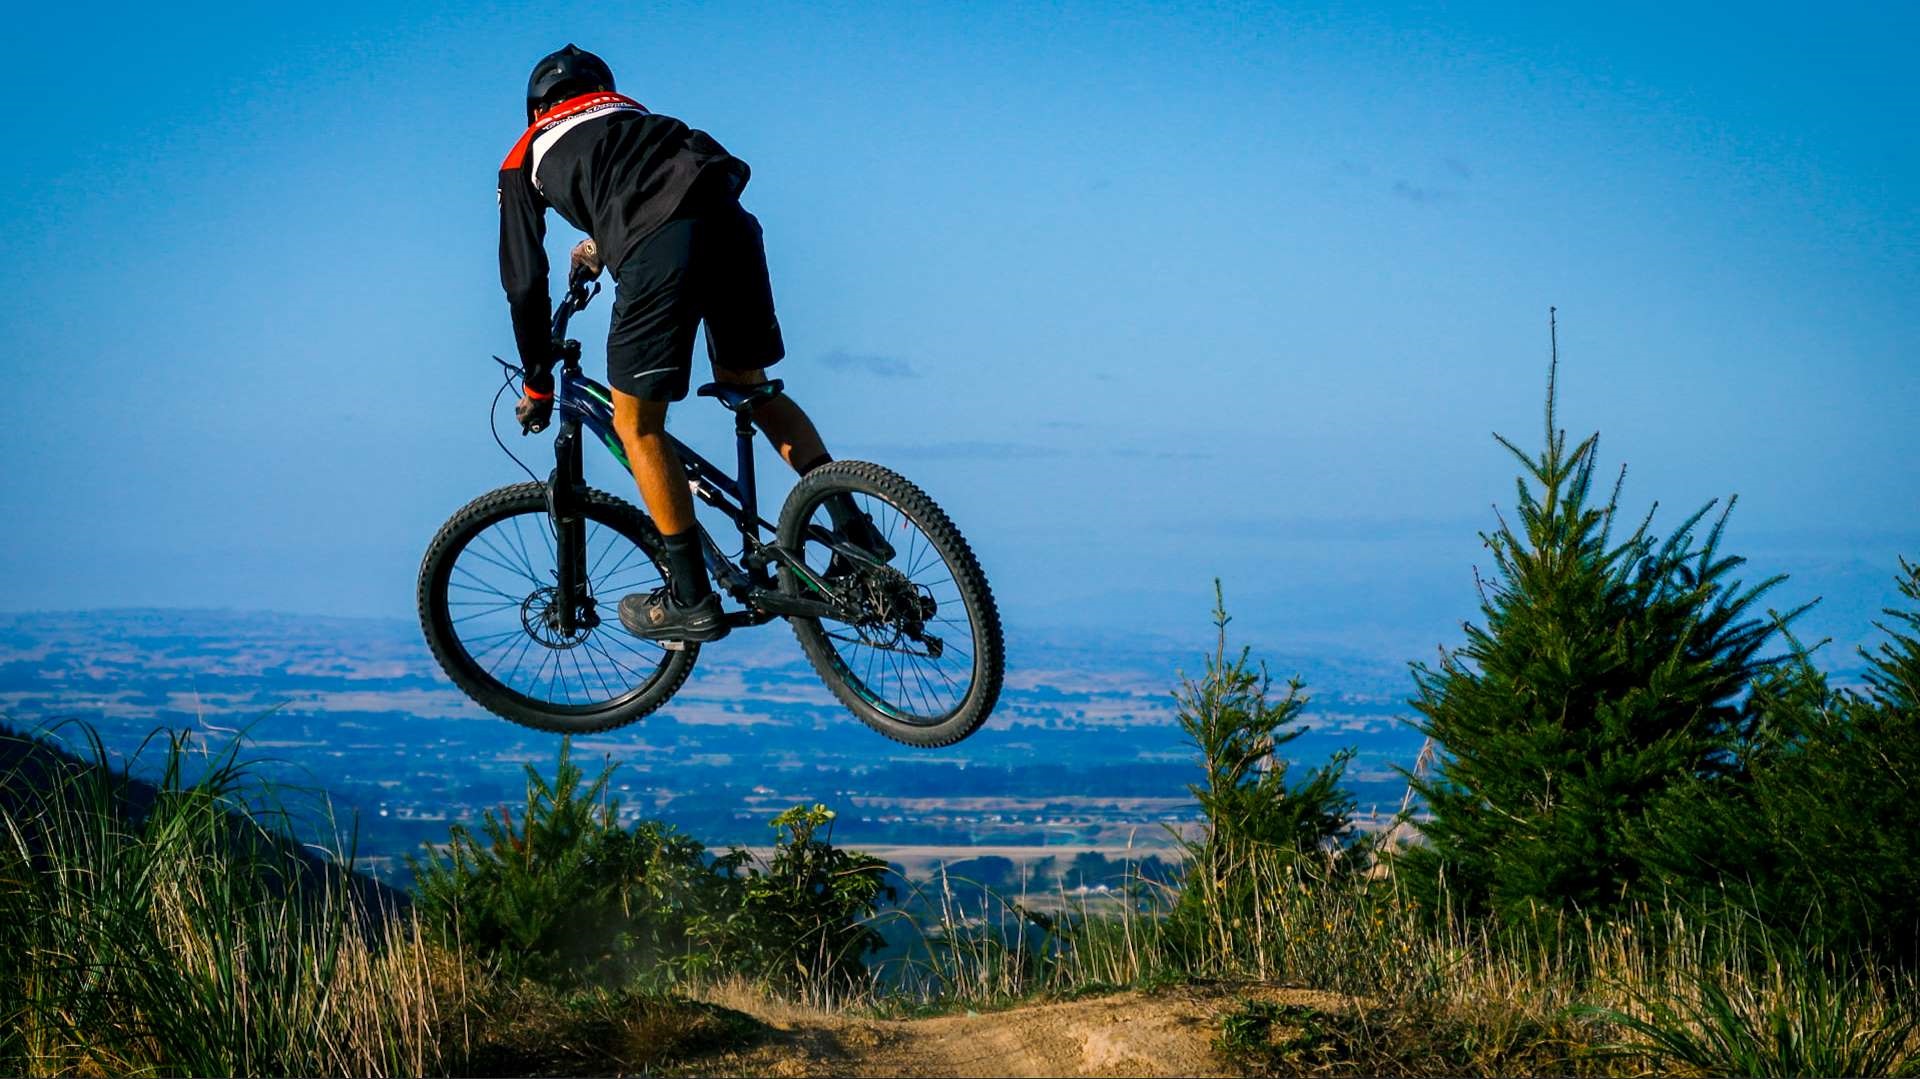 Photo shows man on mountainbike leaping in the air on a dirt track at the top of a hill, with views out towards Palmerston North.